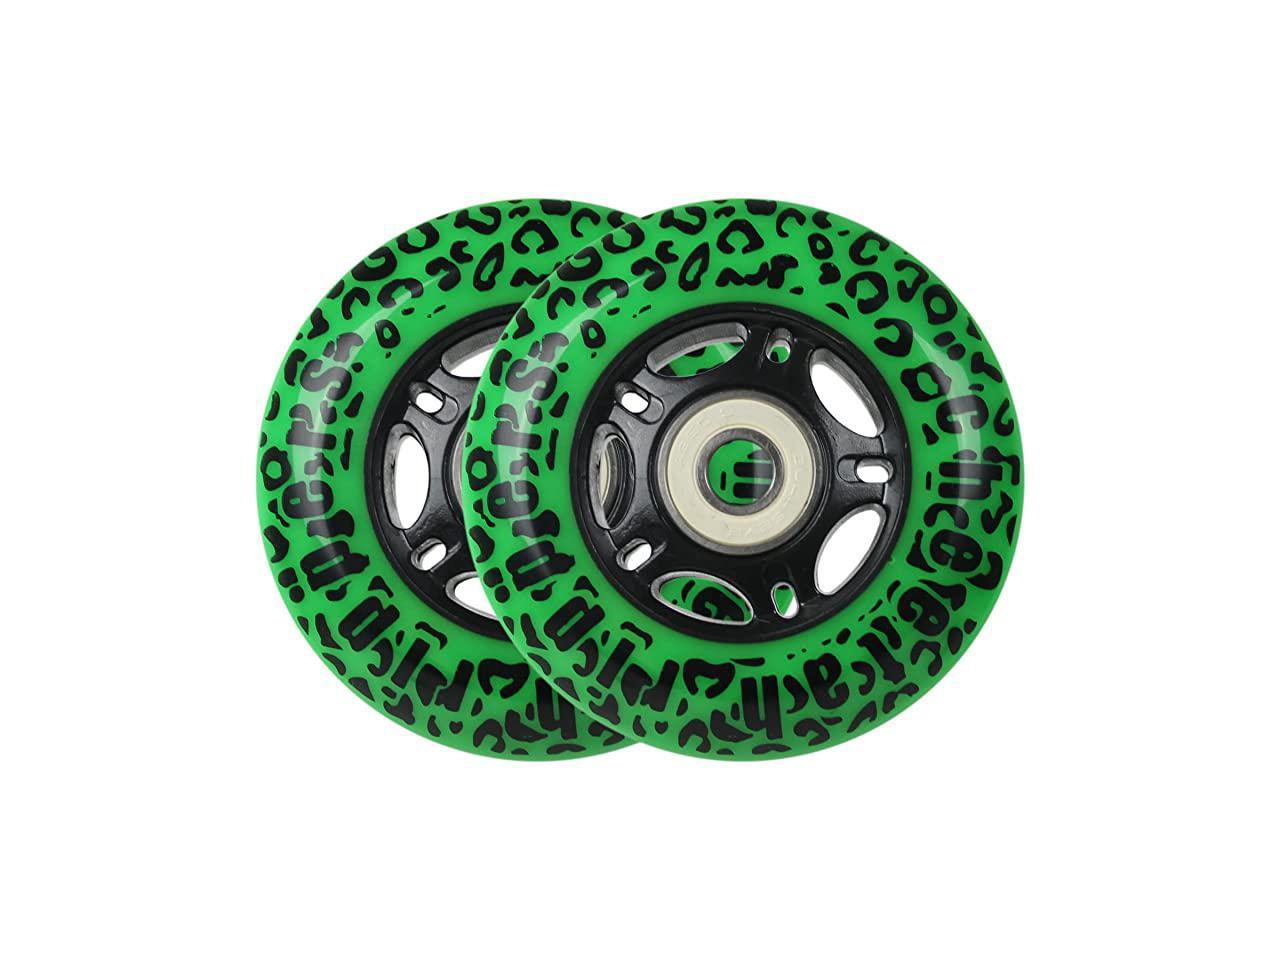 WHITE CHEETAH Wheels for RIPSTICK ripstik wave board ABEC 9 76MM 89A OUTDOOR 